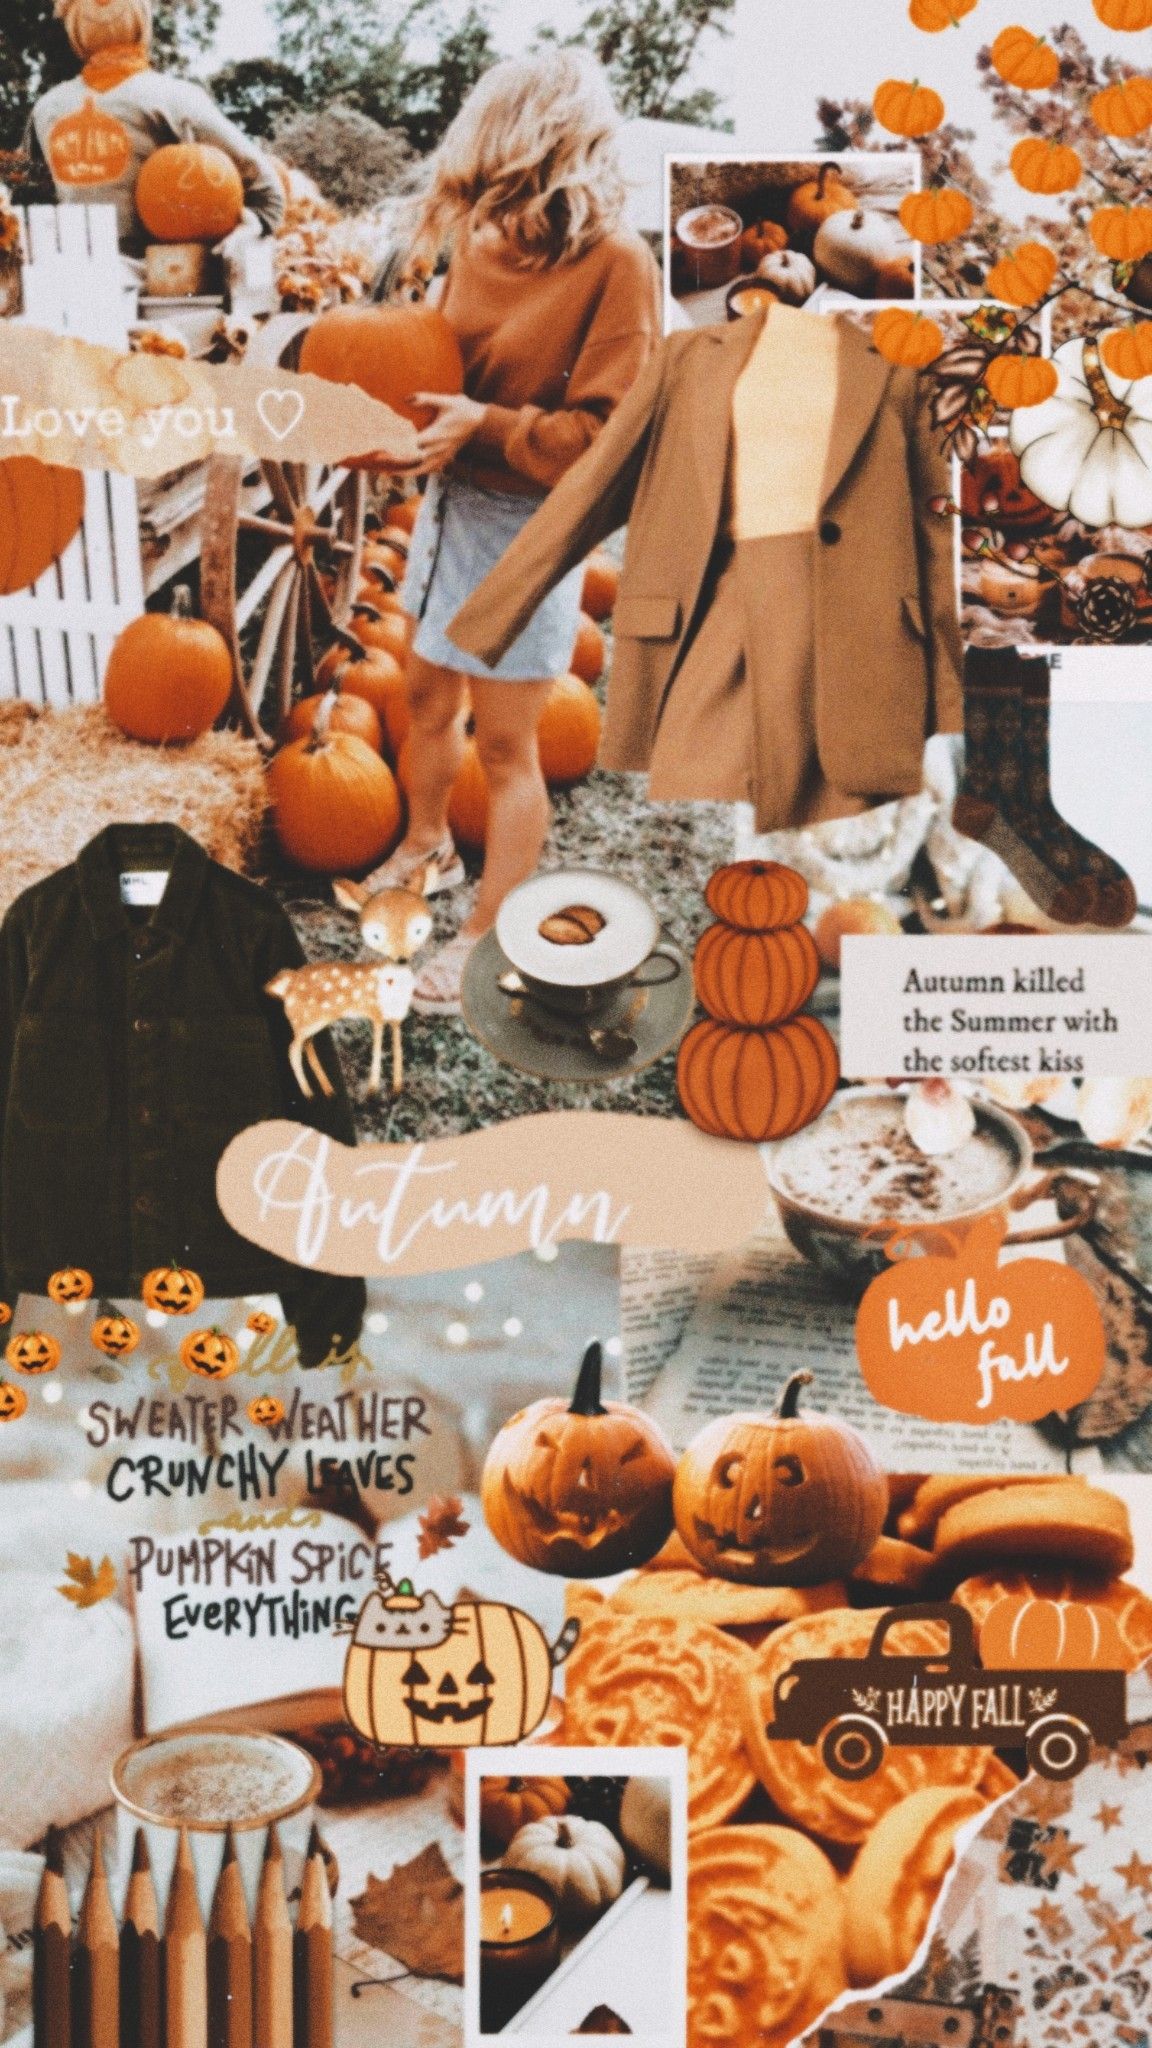 An autumn themed collage with pumpkins, leaves, and a cup of coffee. - Pumpkin, Halloween, cute fall